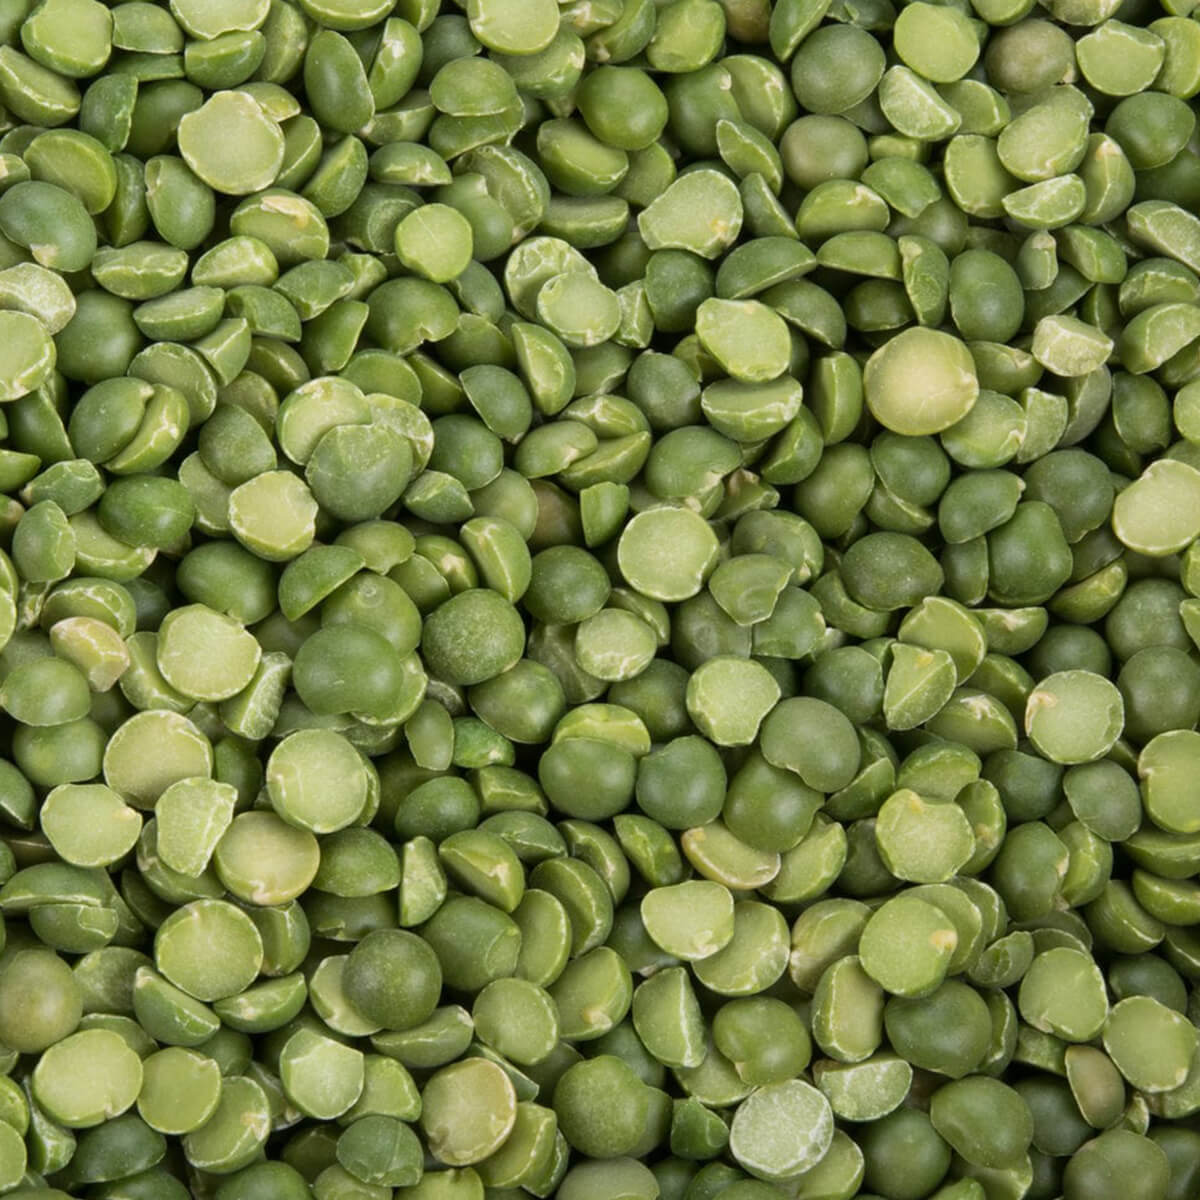 Spicy Wasabi Dry Peas